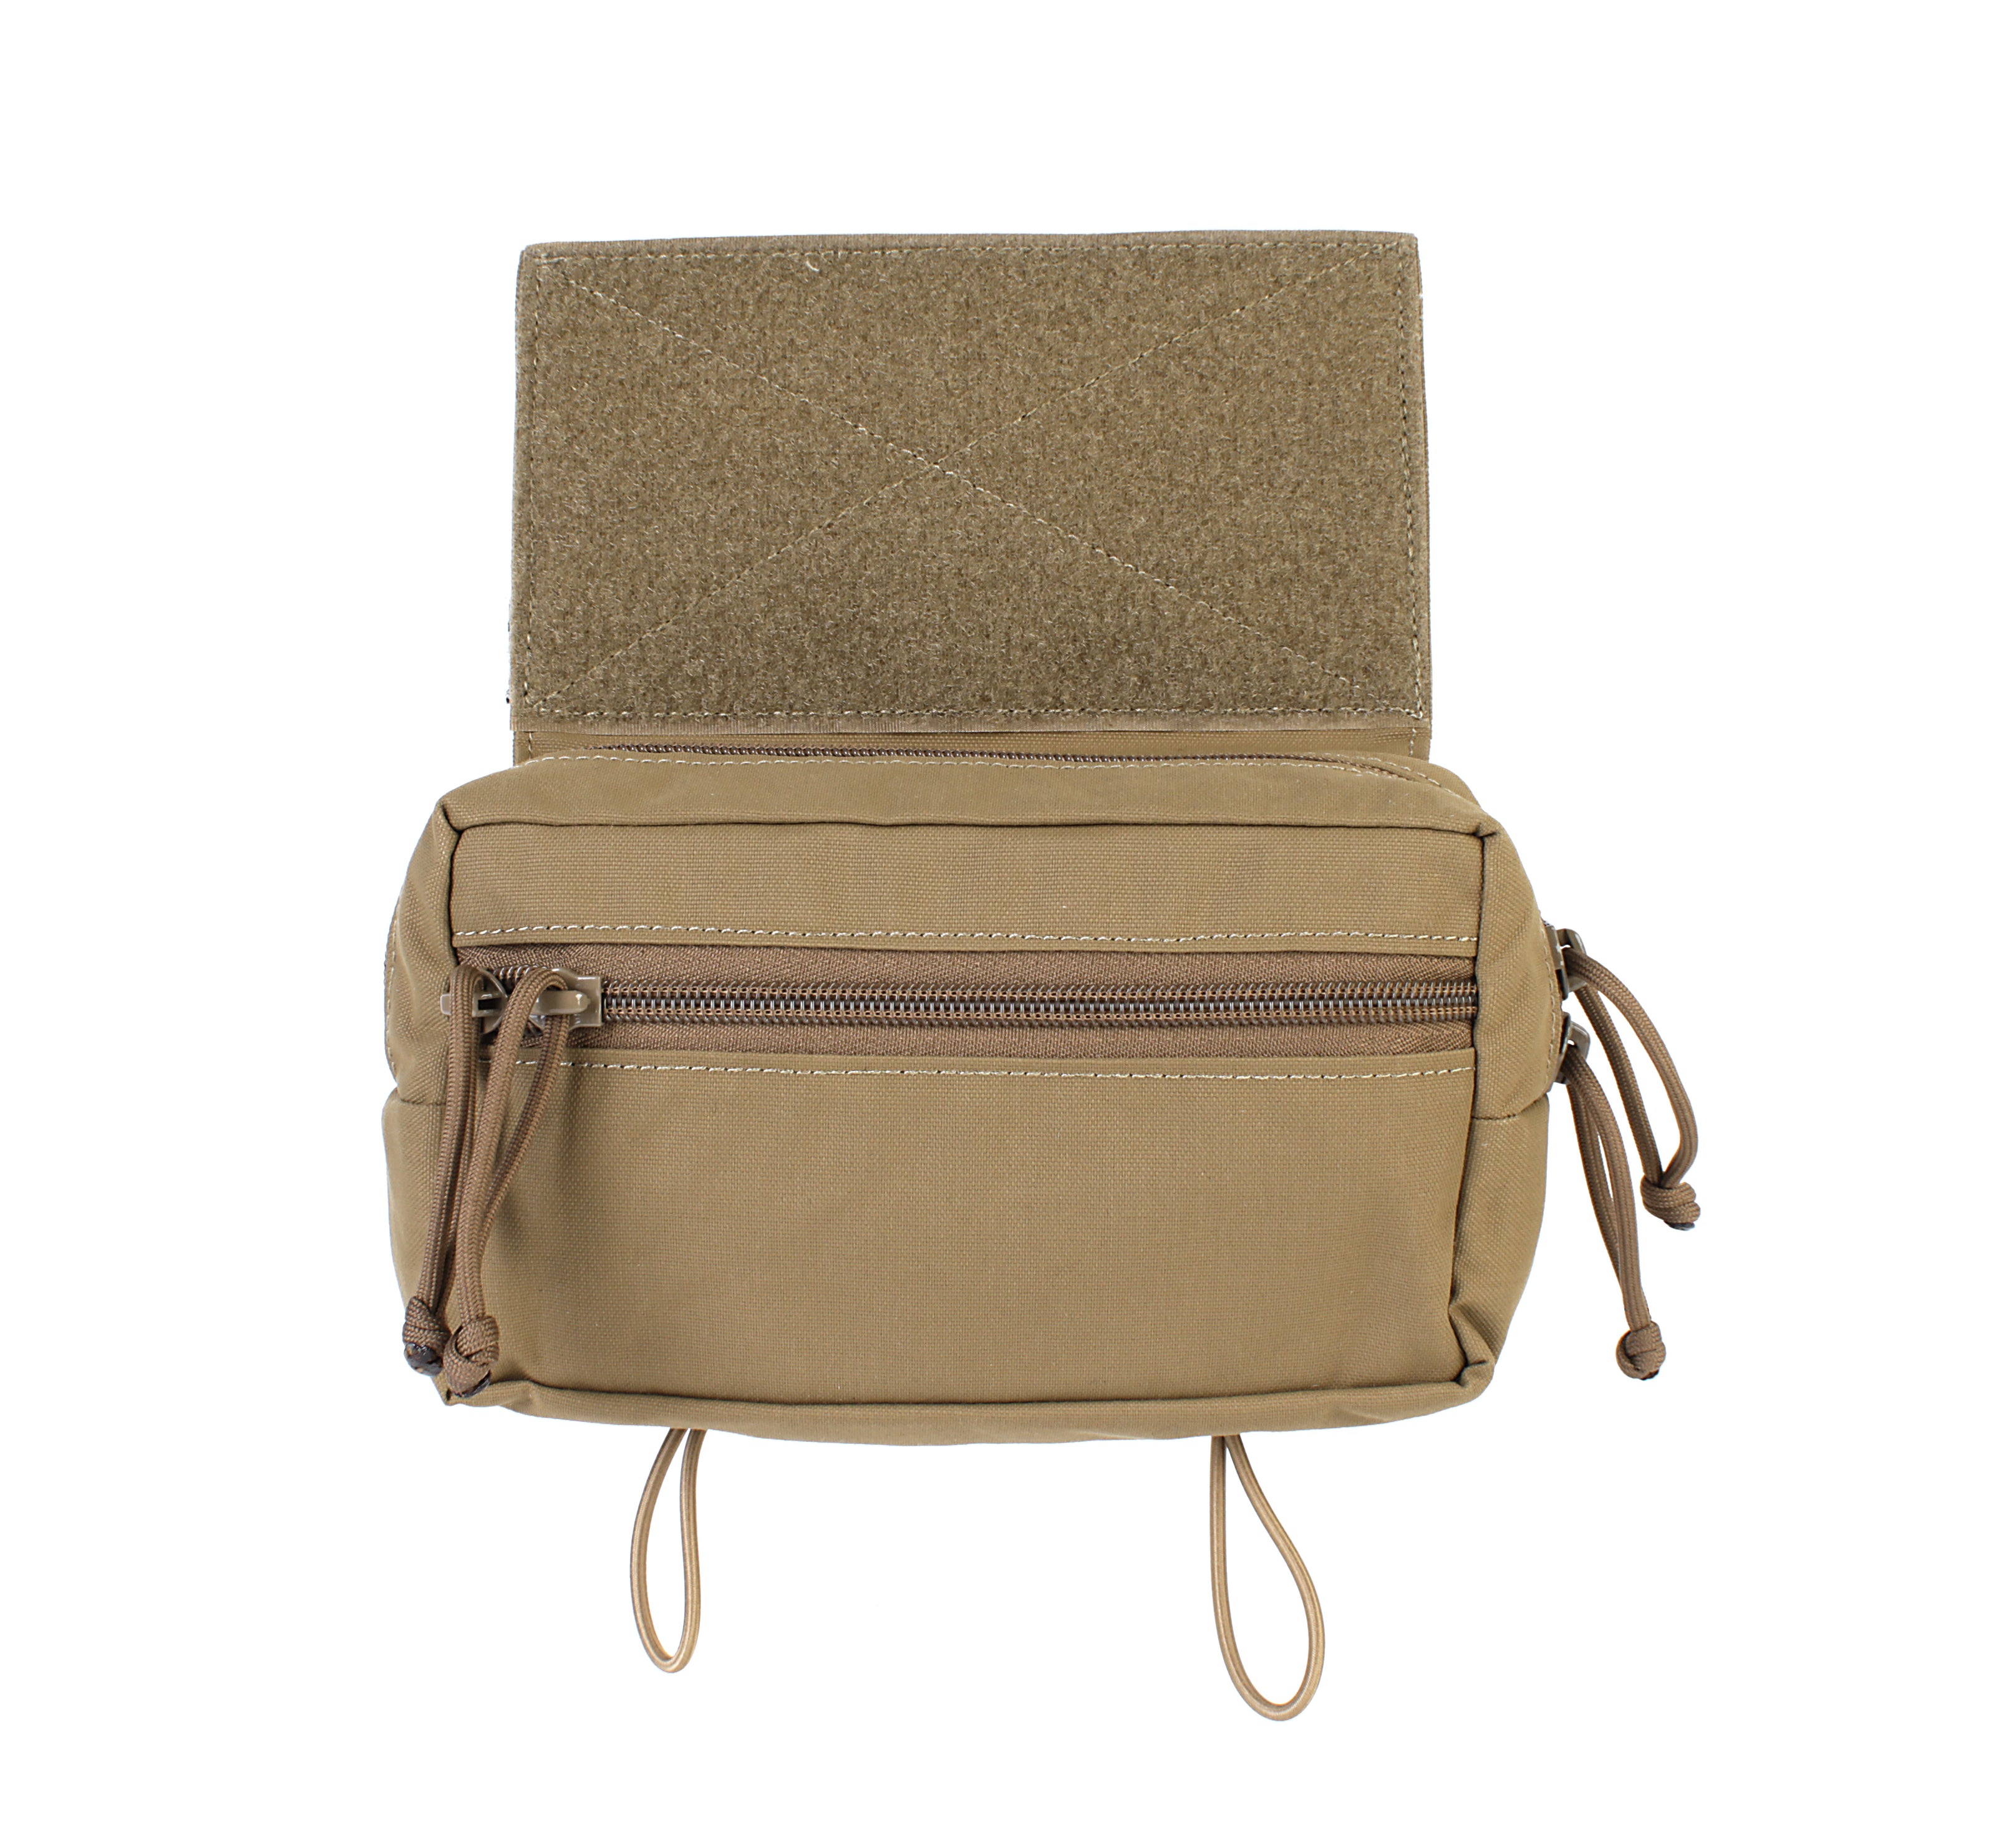 SS STYLE SACK Pouch